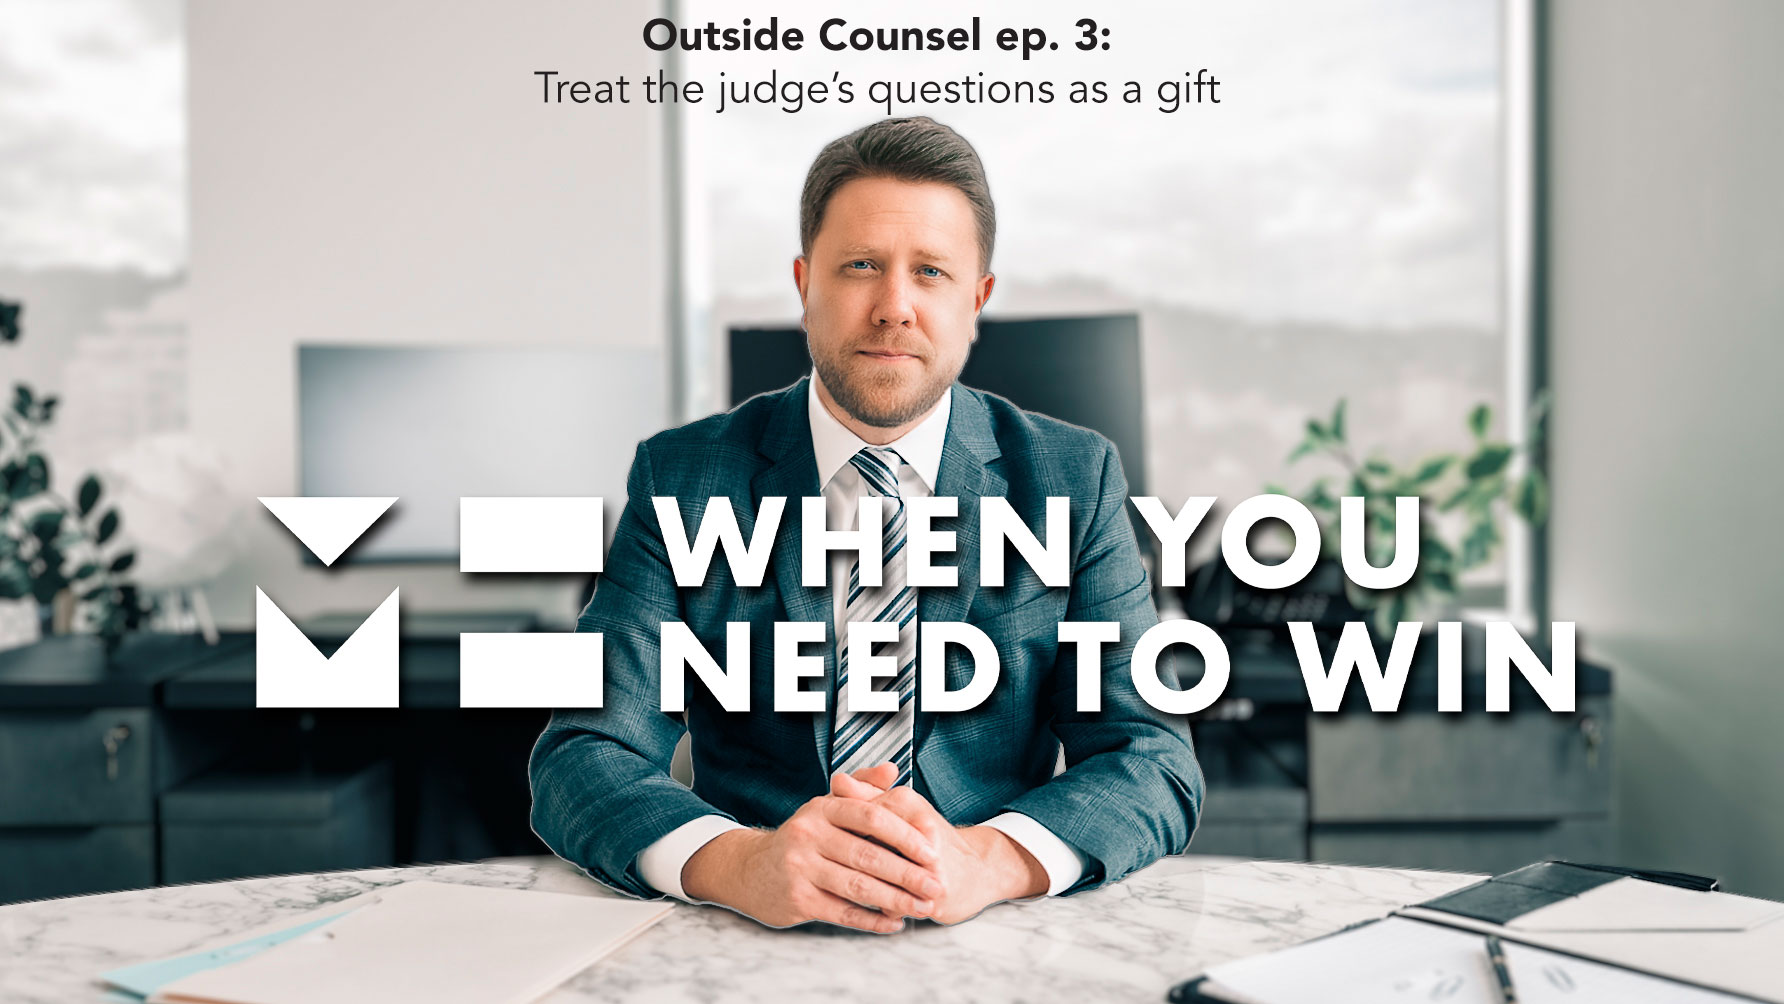 When You Need to Win - Treat the judge's questions like a gift